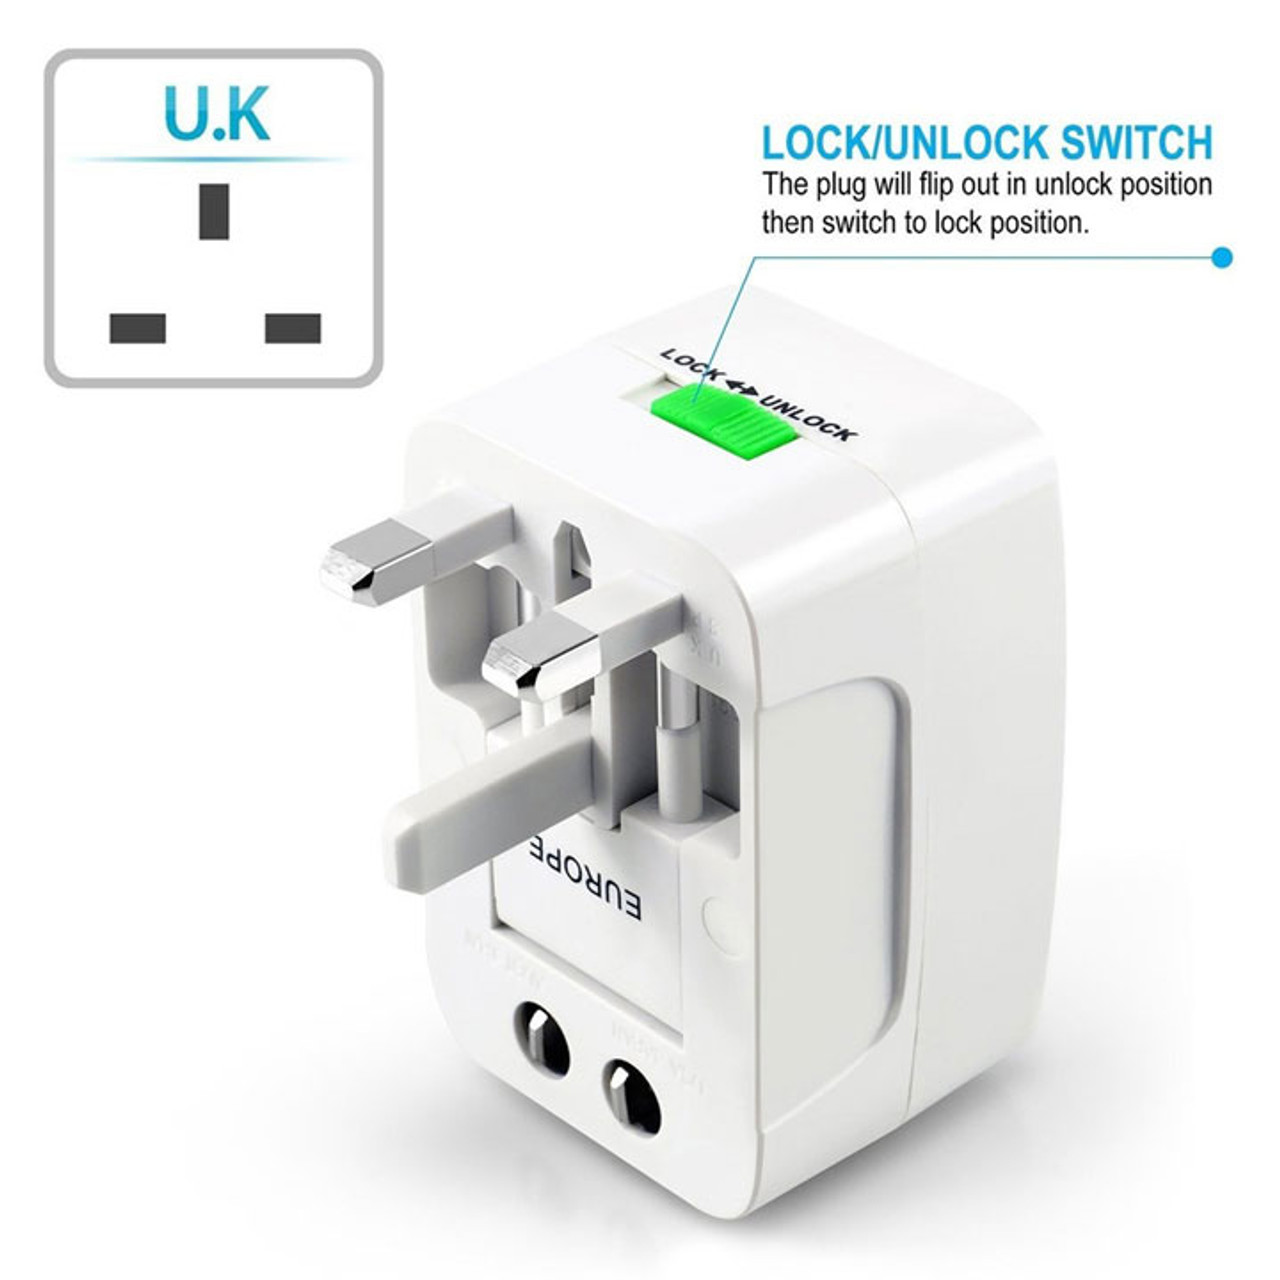 International travel plug adapter guide: which plug to use on a trip?